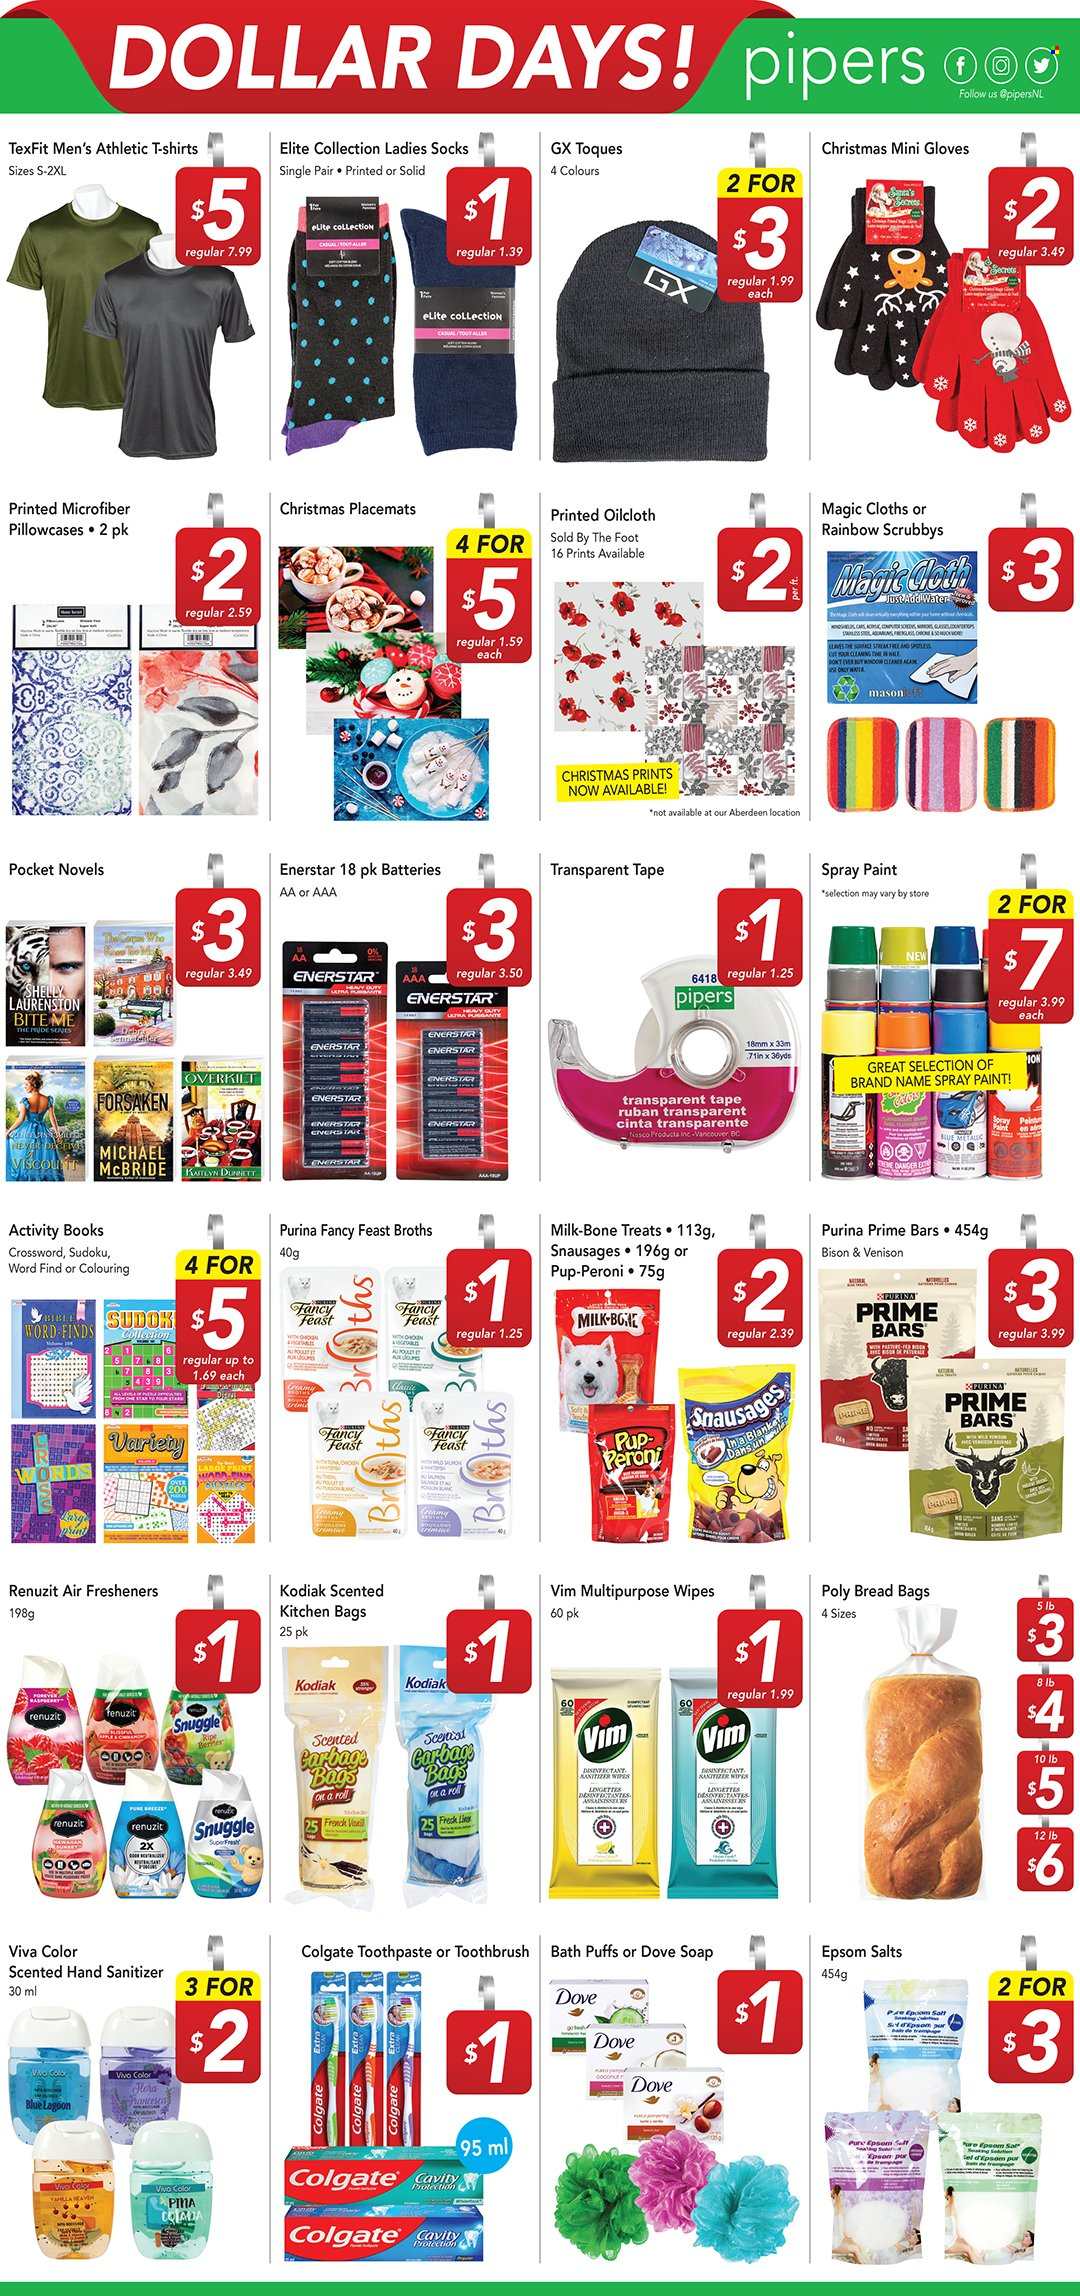 thumbnail - Pipers Flyer - November 24, 2022 - November 30, 2022 - Sales products - bread, puffs, milk, Flora, Dove, wipes, multipurpose wipes, Snuggle, soap, toothbrush, toothpaste, hand sanitizer, bag, gloves, deco strips, Renuzit, air freshener, battery, placemat, pillowcase, Purina, Pup-Peroni, Fancy Feast, t-shirt, socks, spray paint, paint, Colgate, desinfection. Page 3.